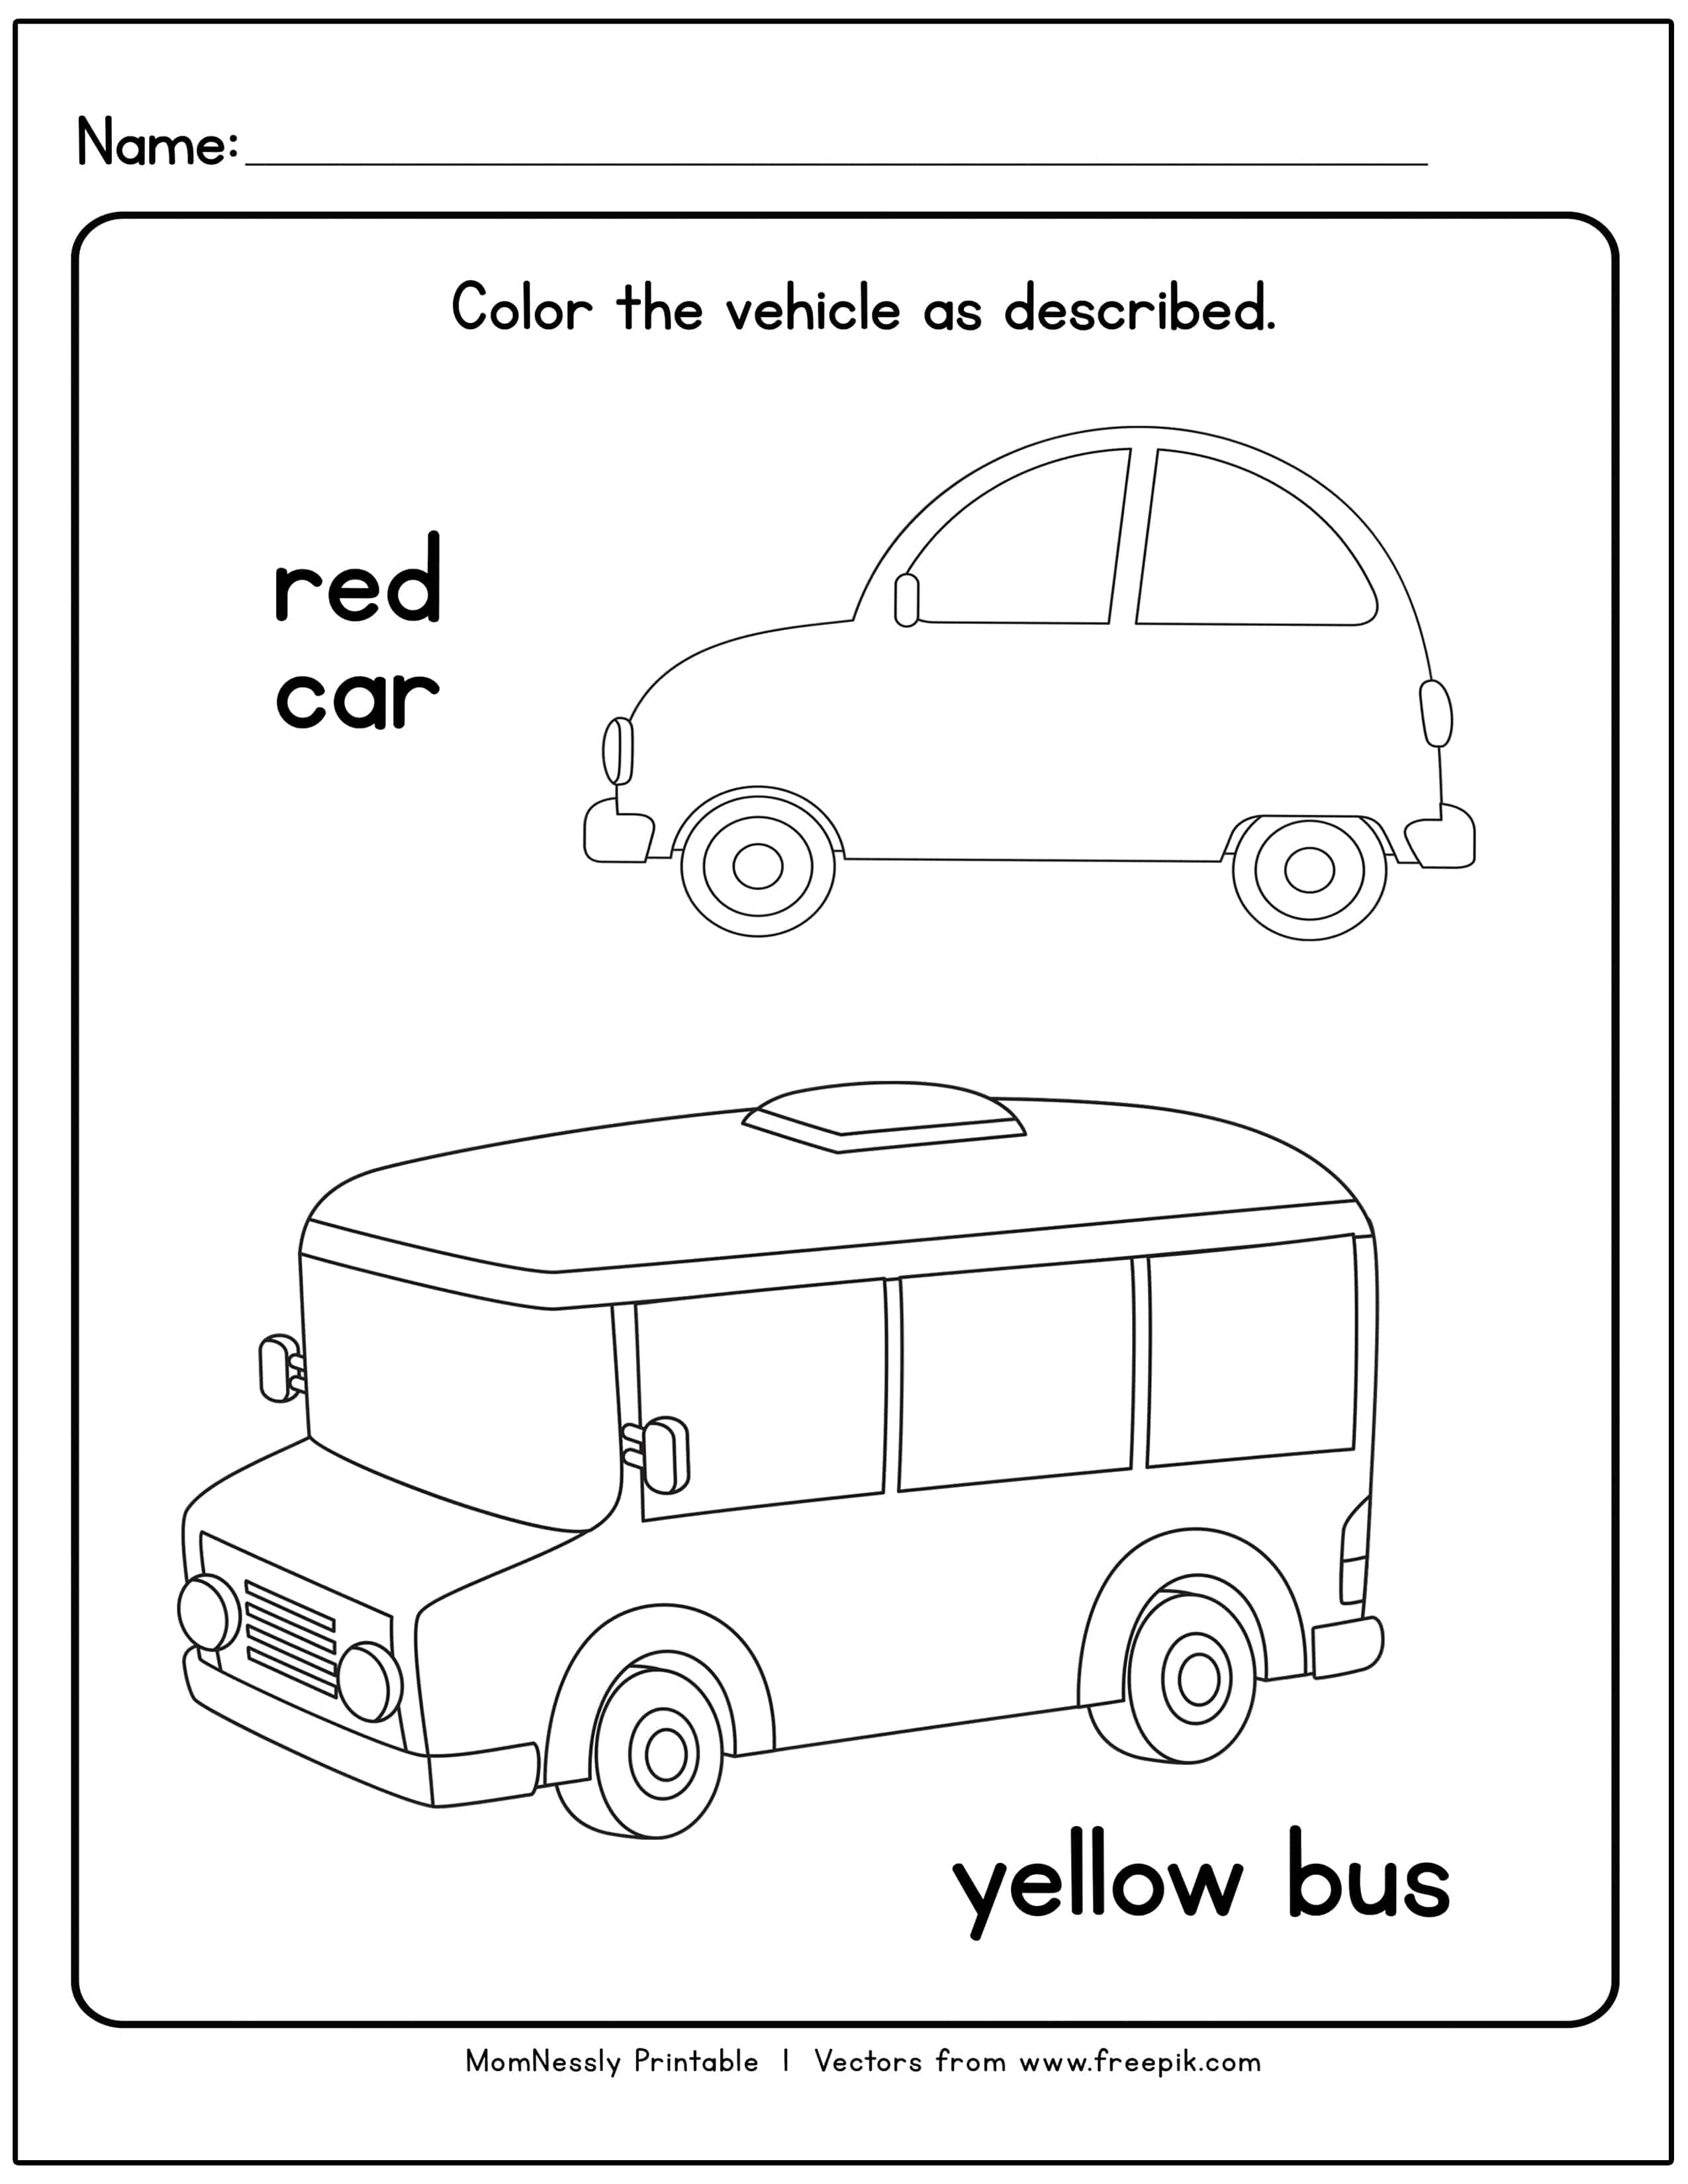 Transportation Themed Coloring Worksheets Car and Bus Vehicle